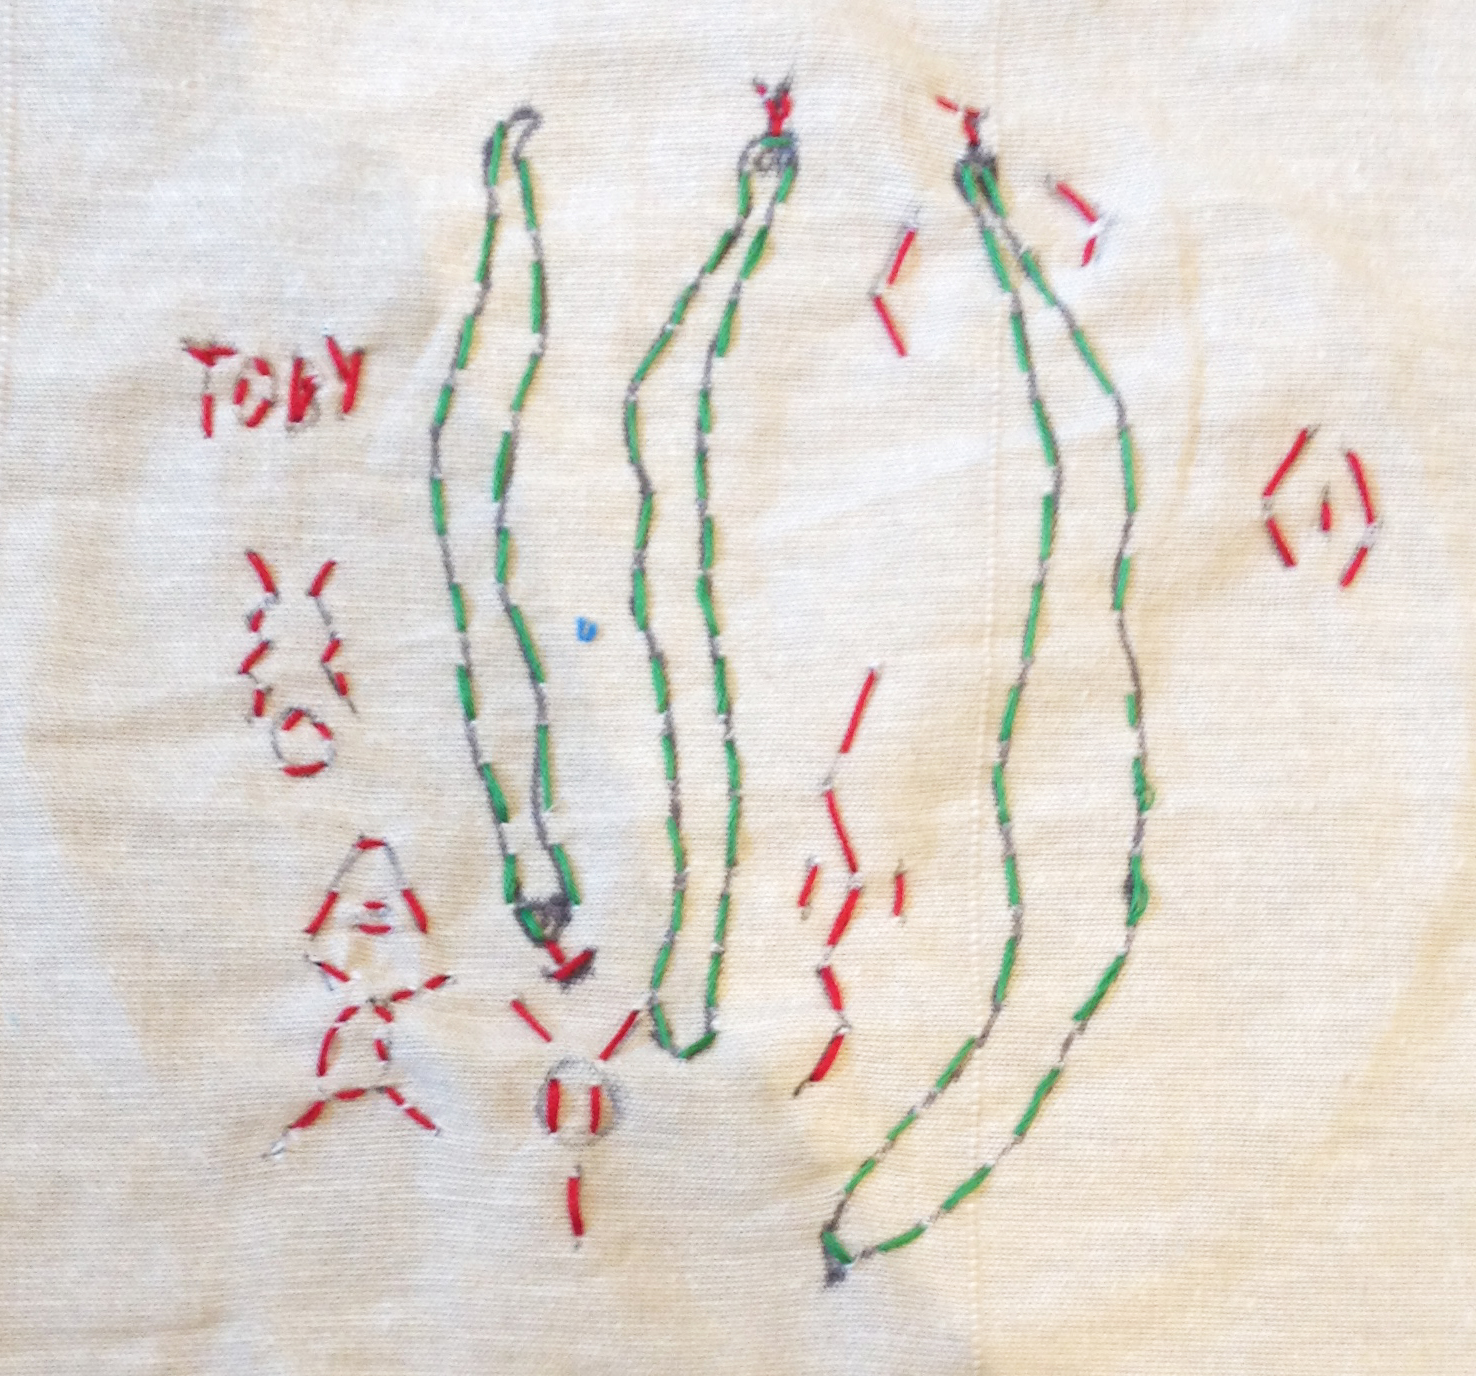 toby embroidery.jpg